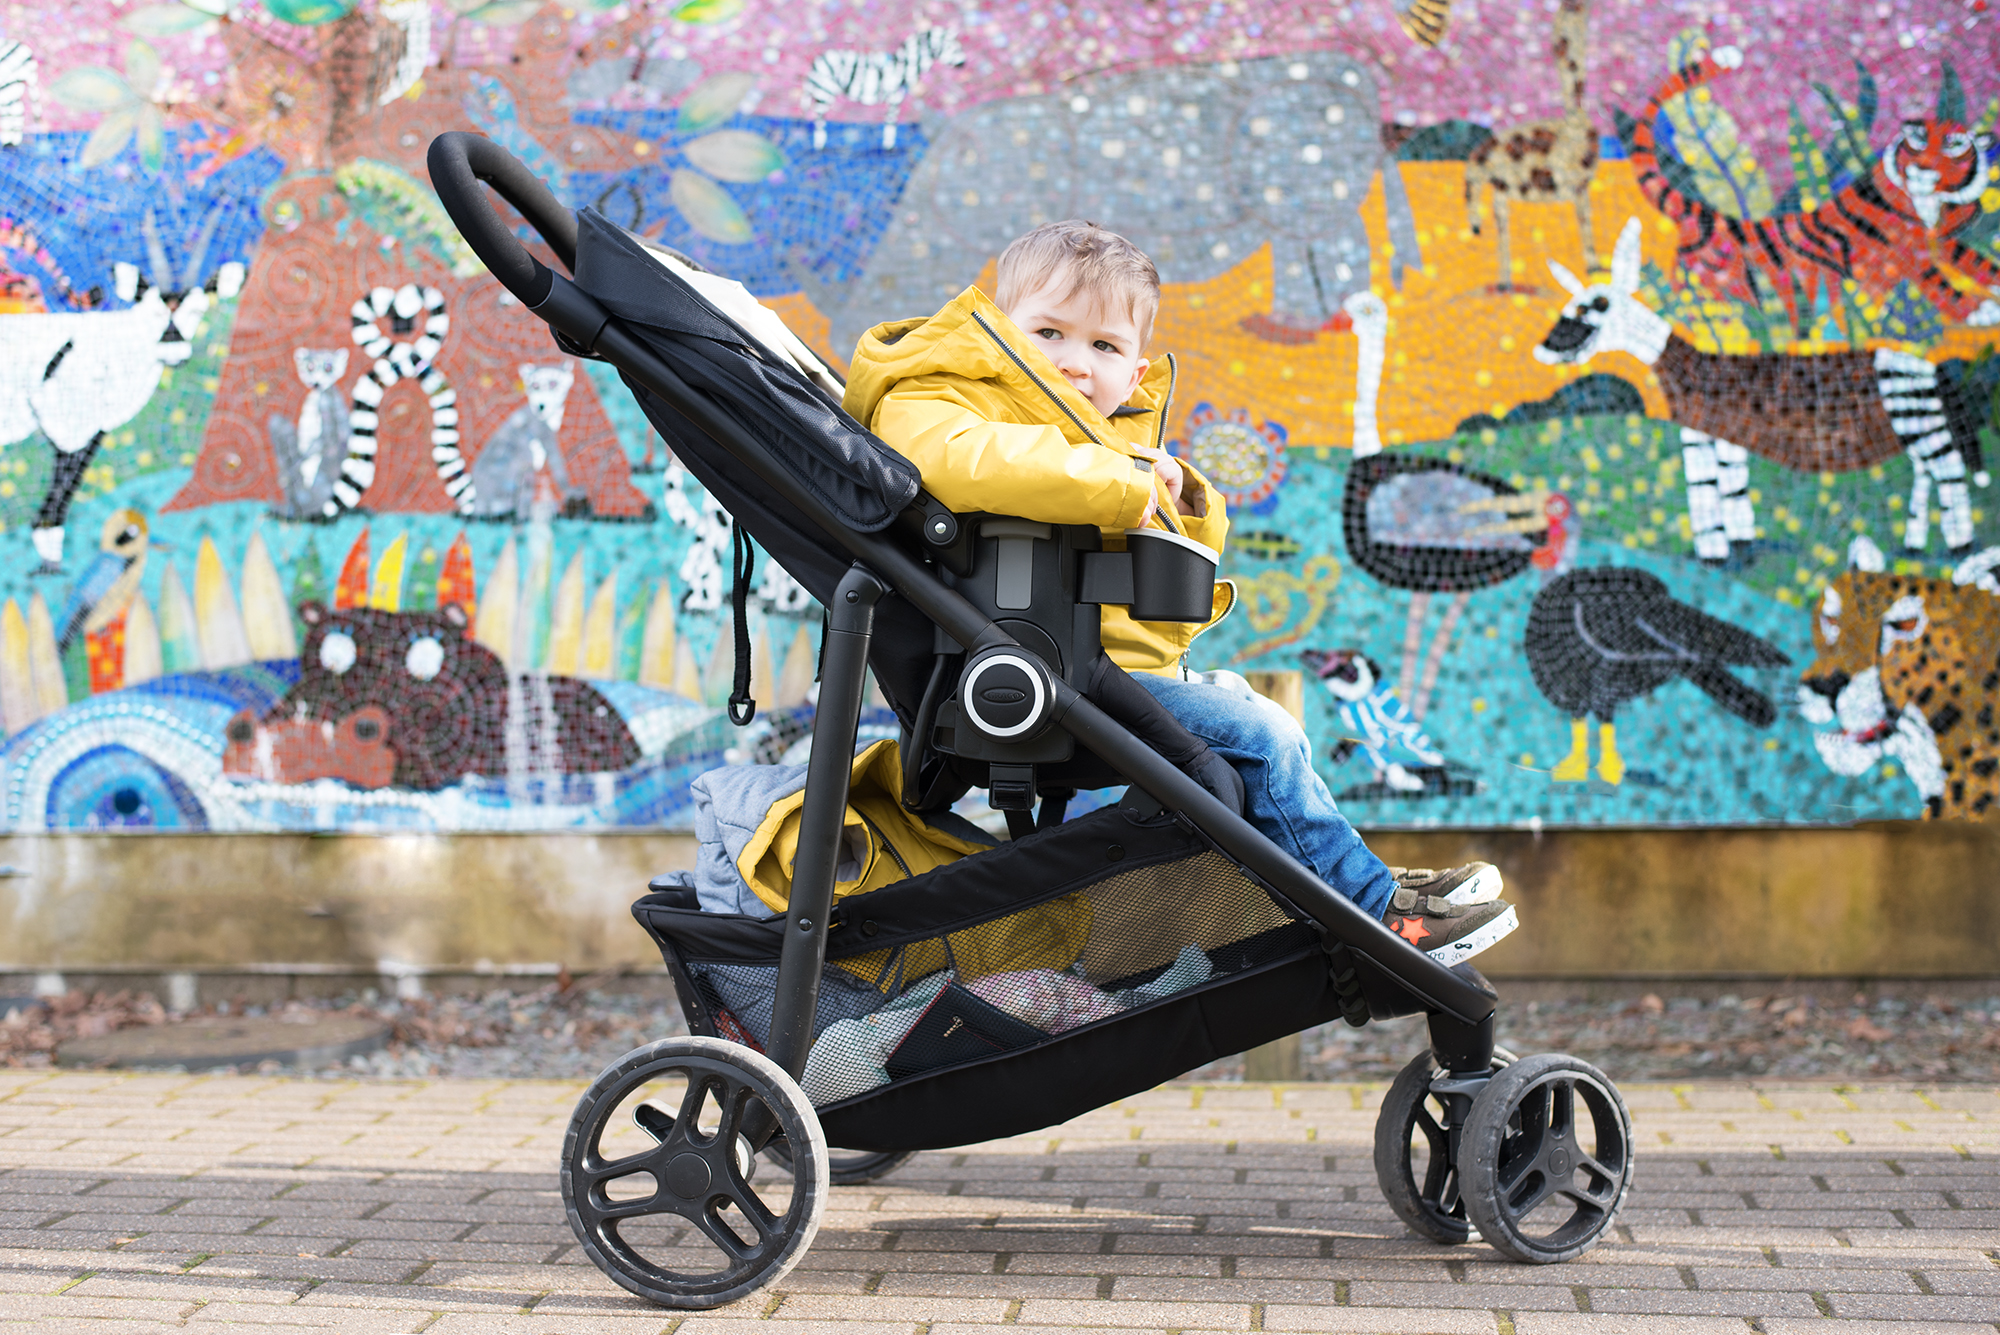 GRACO 3 MODES LITE STROLLER REVIEW